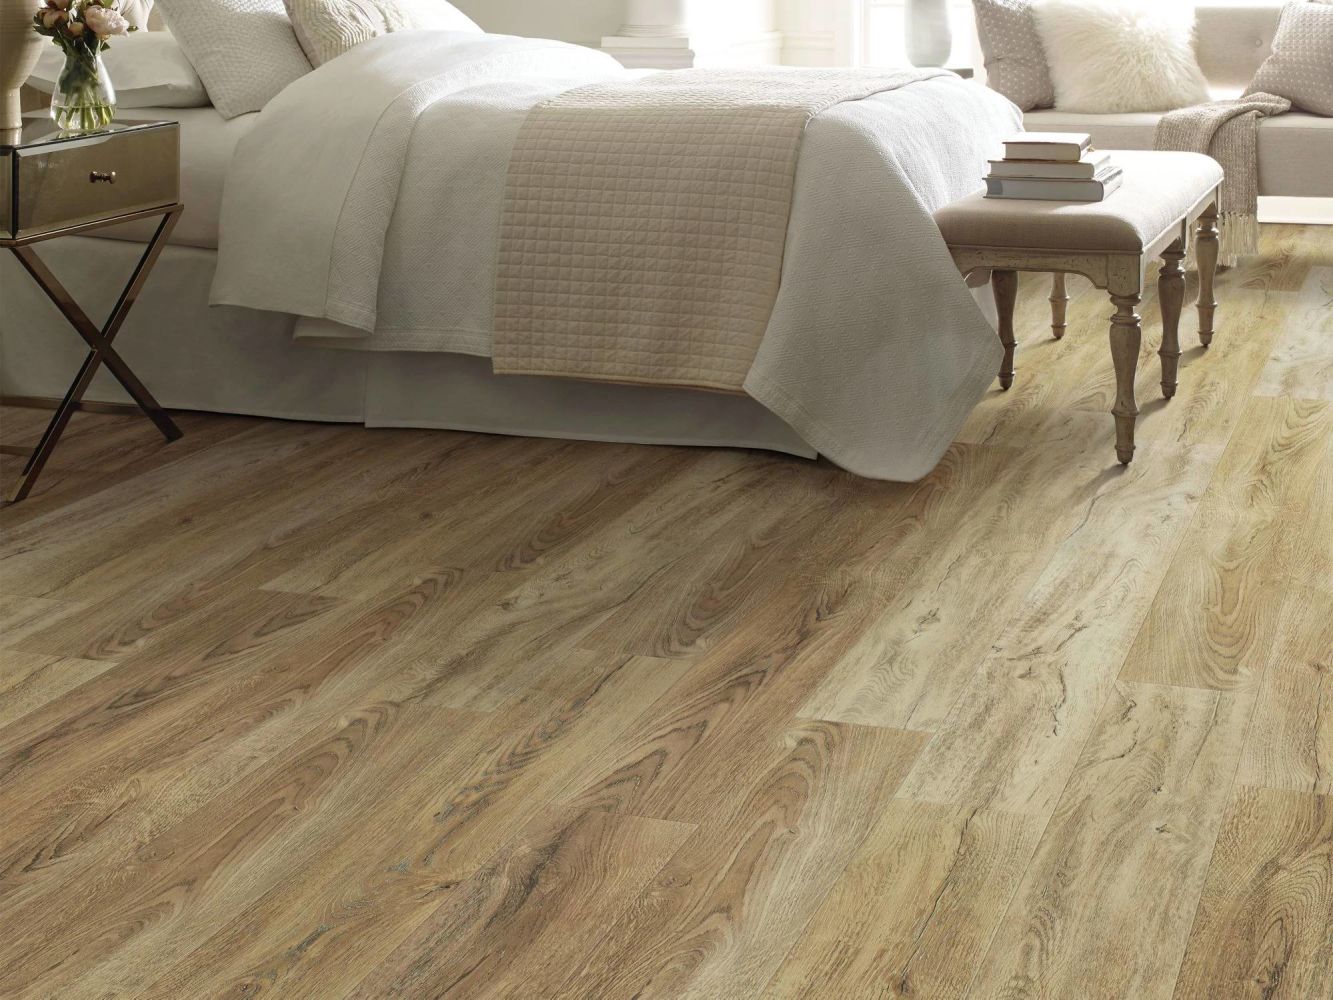 Shaw Floors Pulte Home Hard Surfaces Almargo HD Plus Foresta 00282_PW756